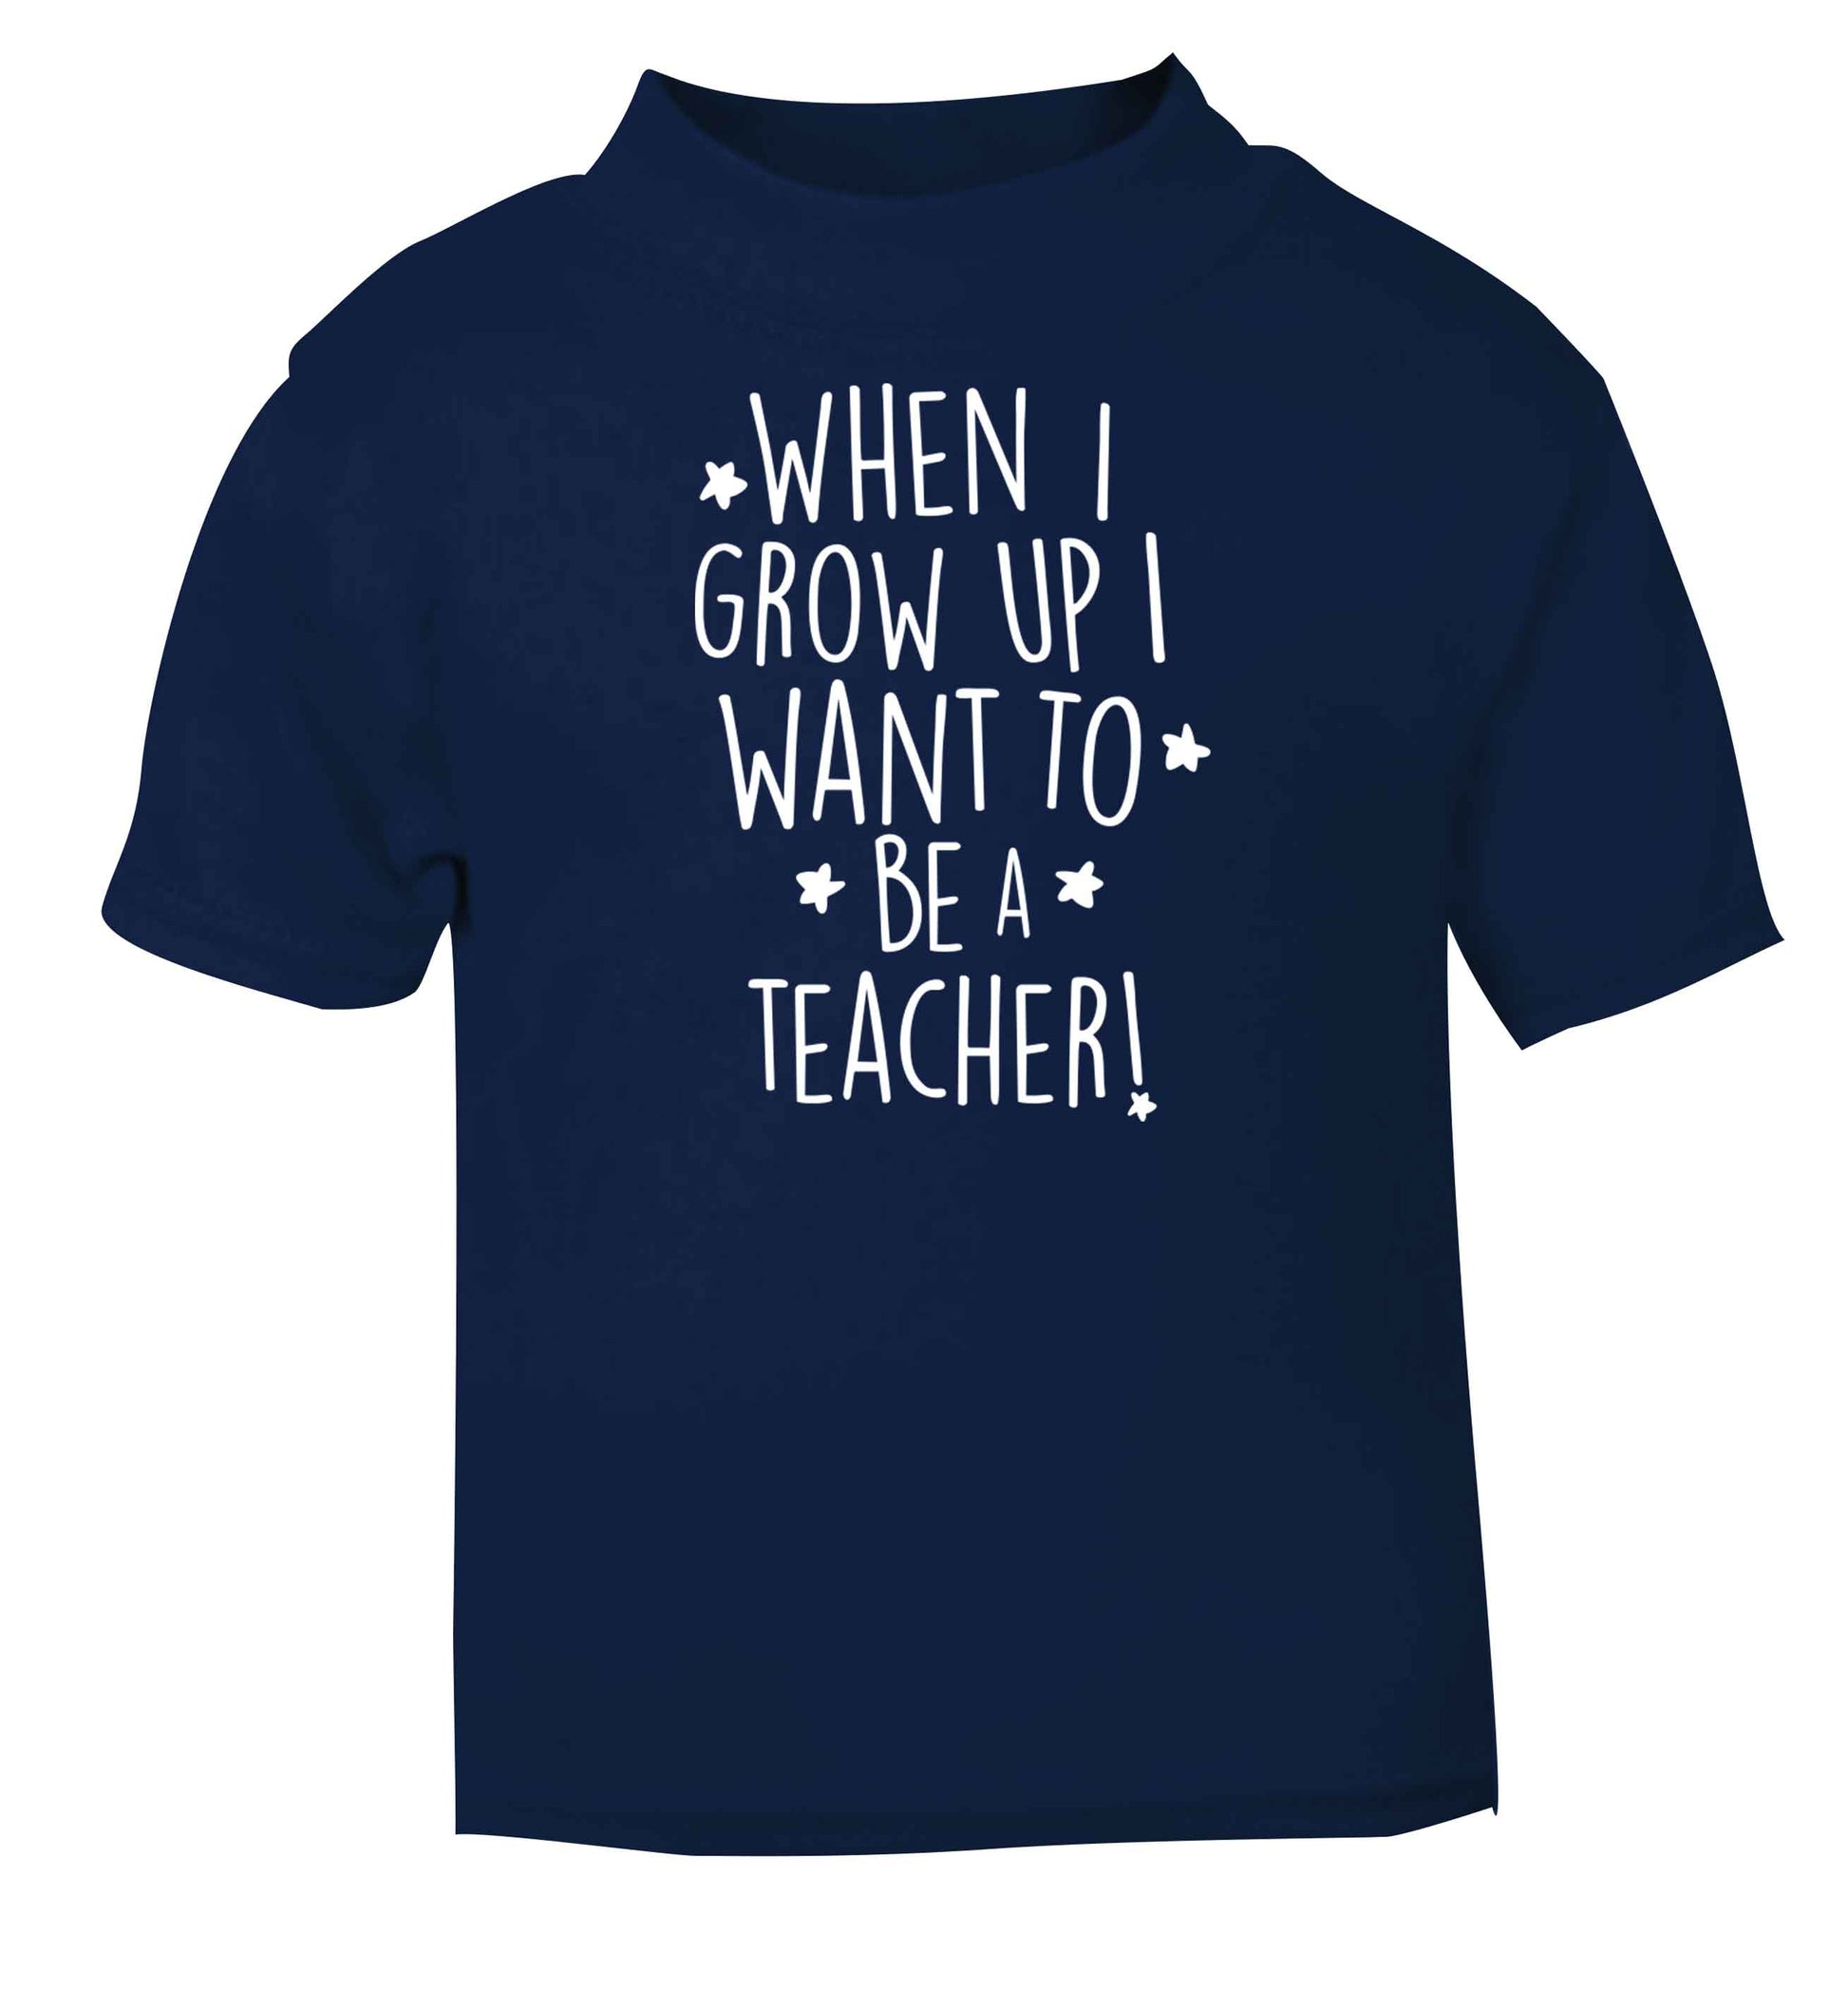 When I grow up I want to be a teacher navy baby toddler Tshirt 2 Years